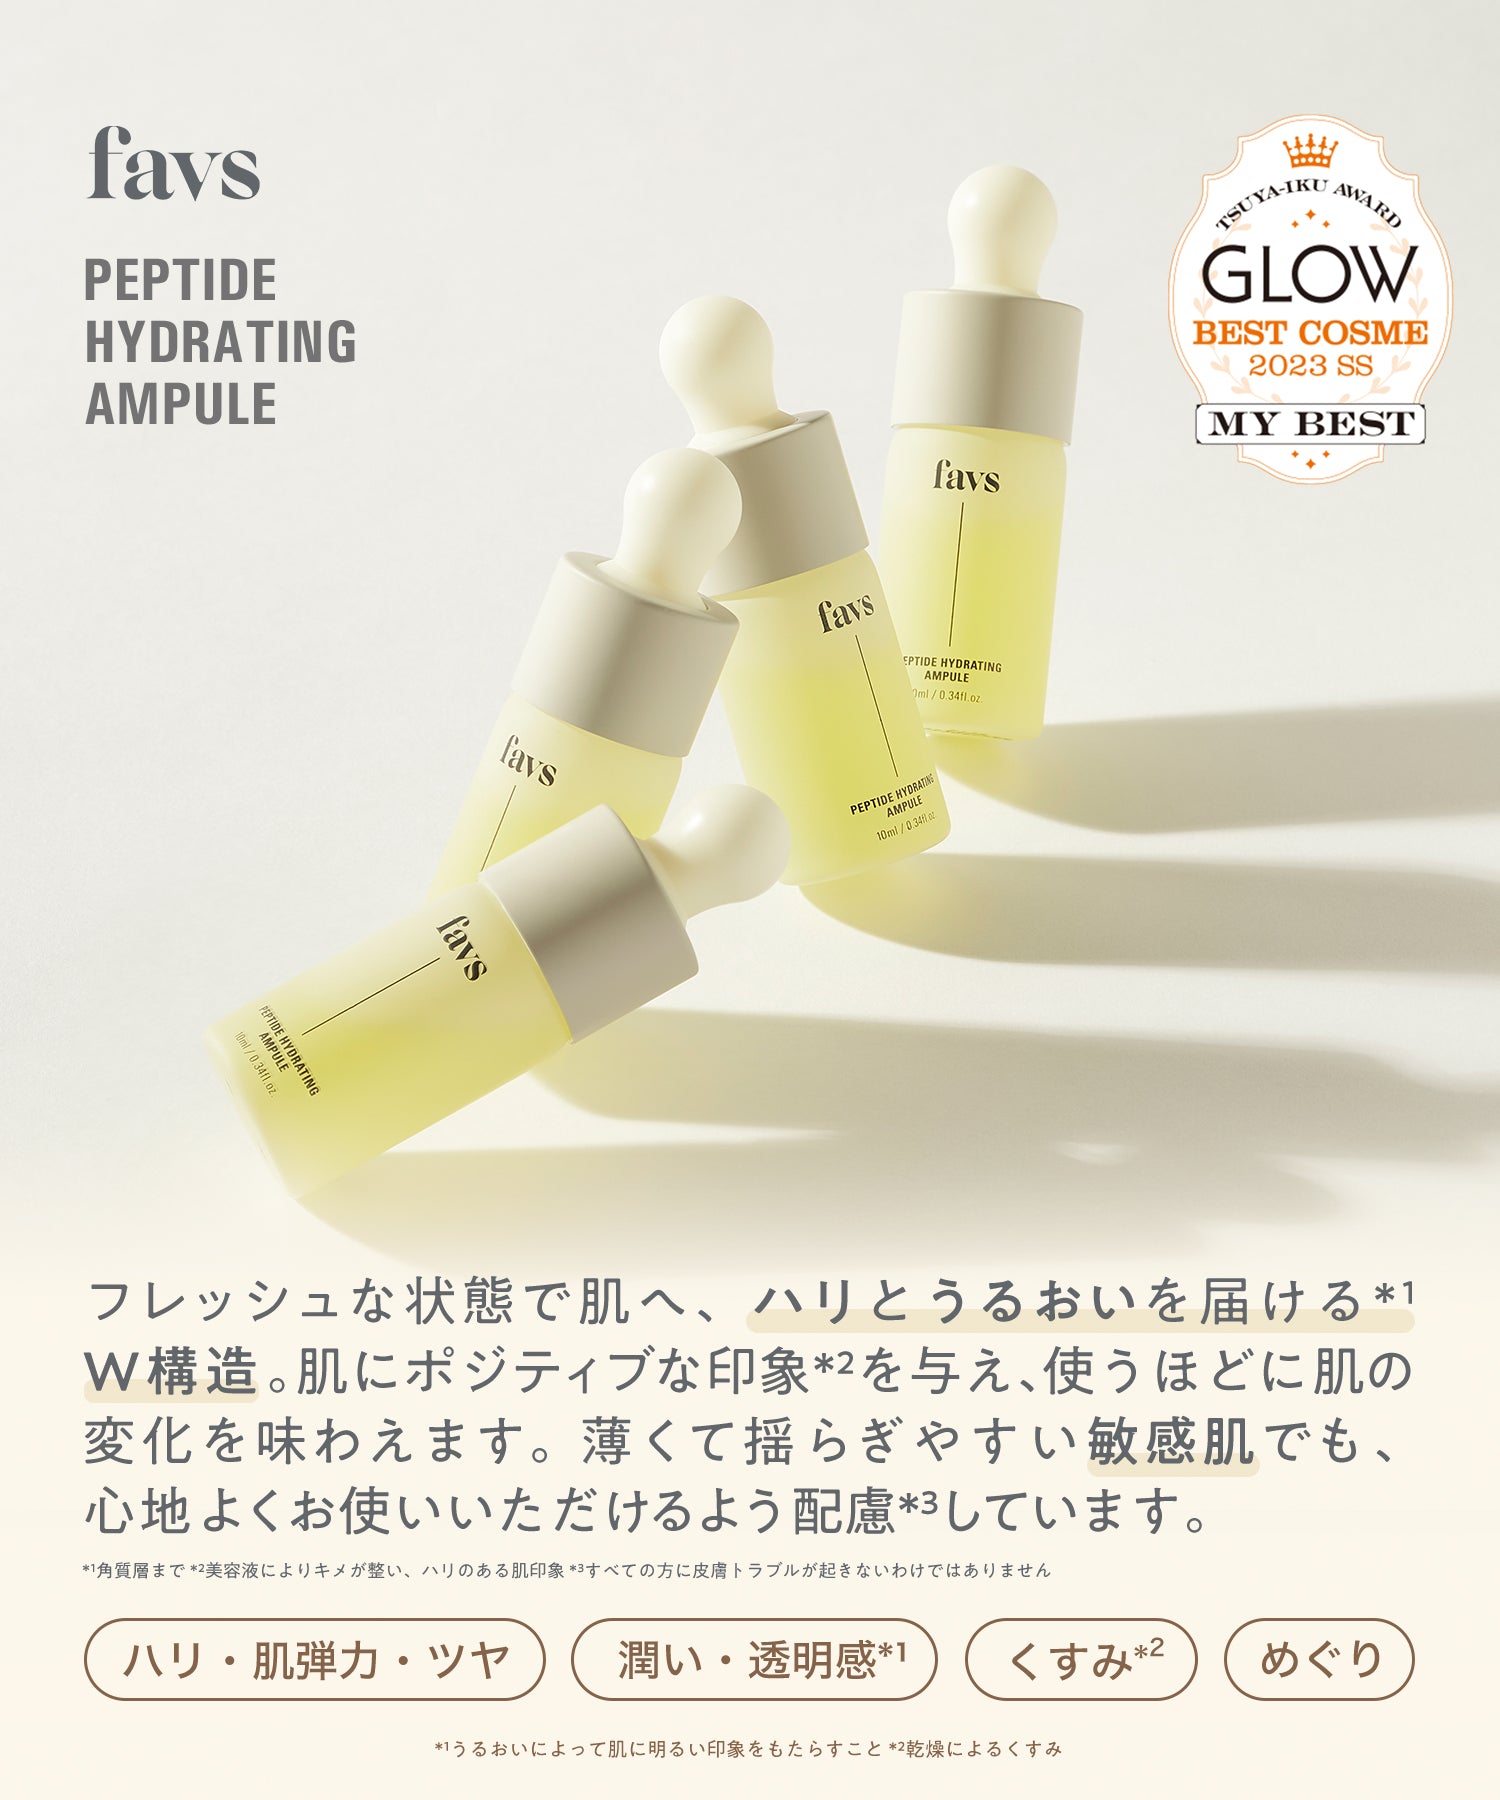 favs PEPTIDE HYDRATING AMPULE